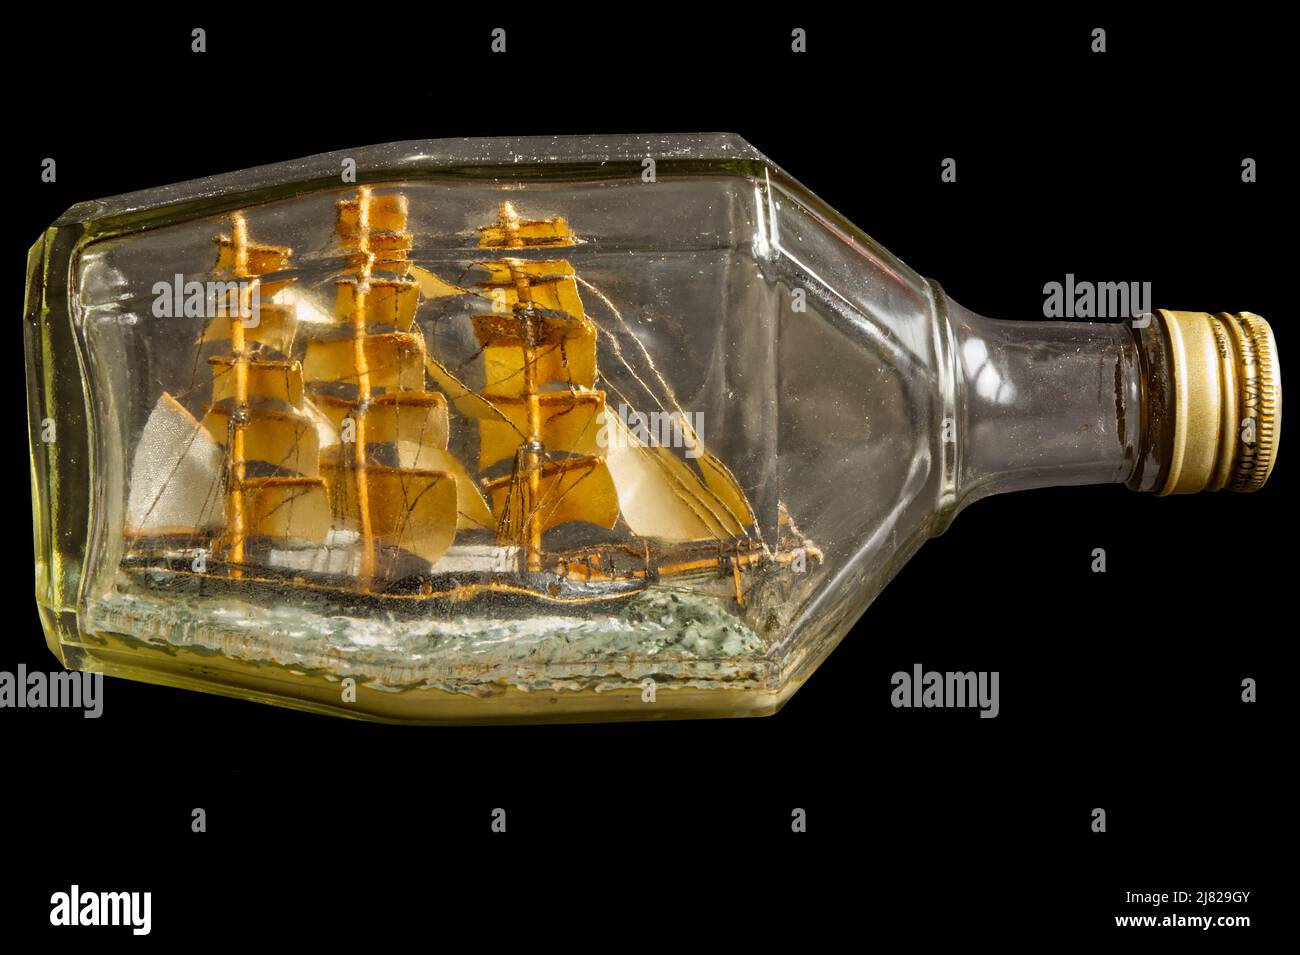 Model of Cutty Sark sailing ship (Tea Clipper) in bottle Stock Photo